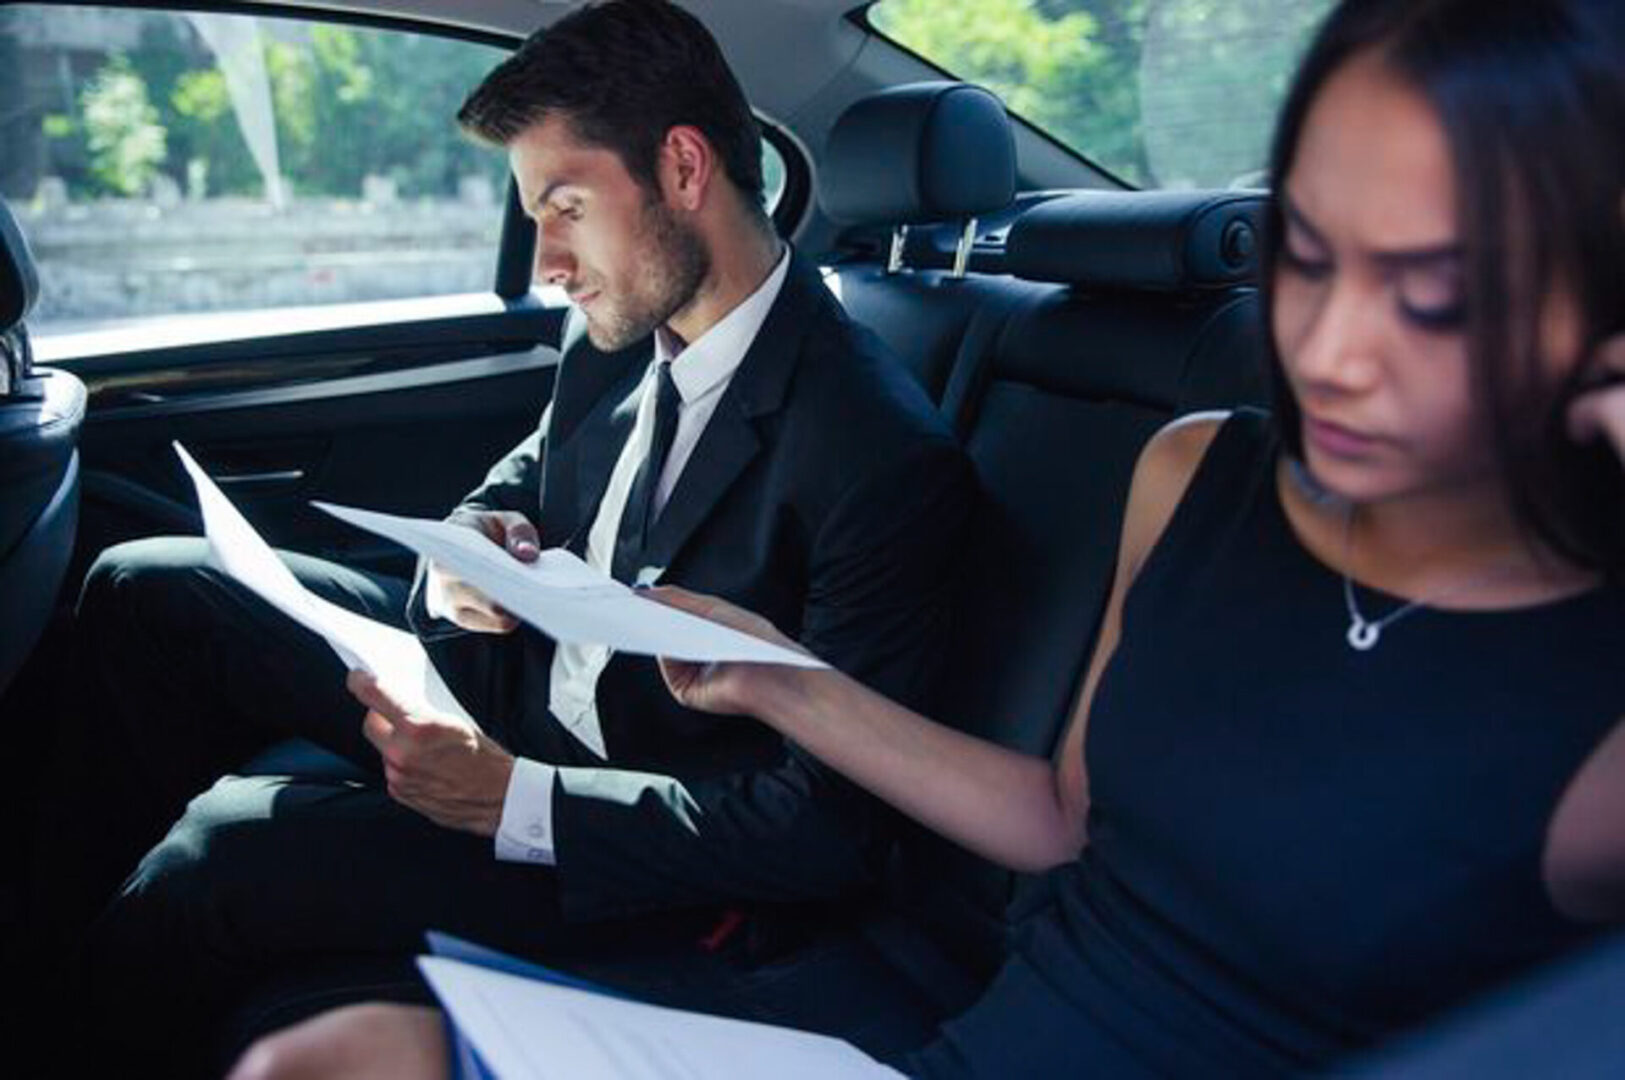 Business professionals working in the backseat of a luxury car